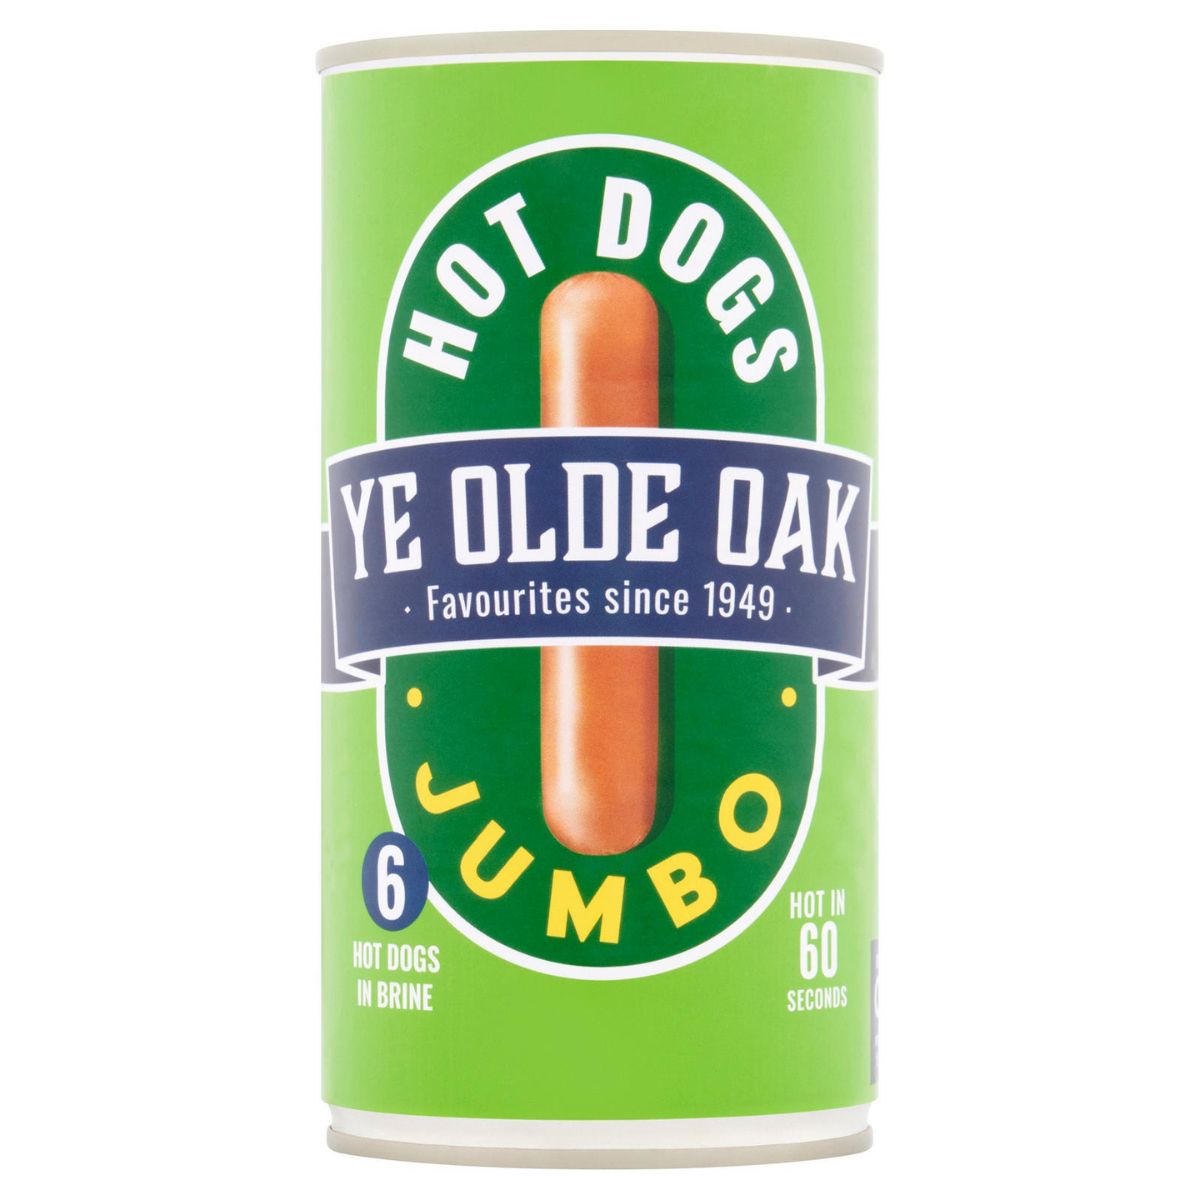 A Ye Olde Oak - Hot Dog Jumbo - 560g can with a label.